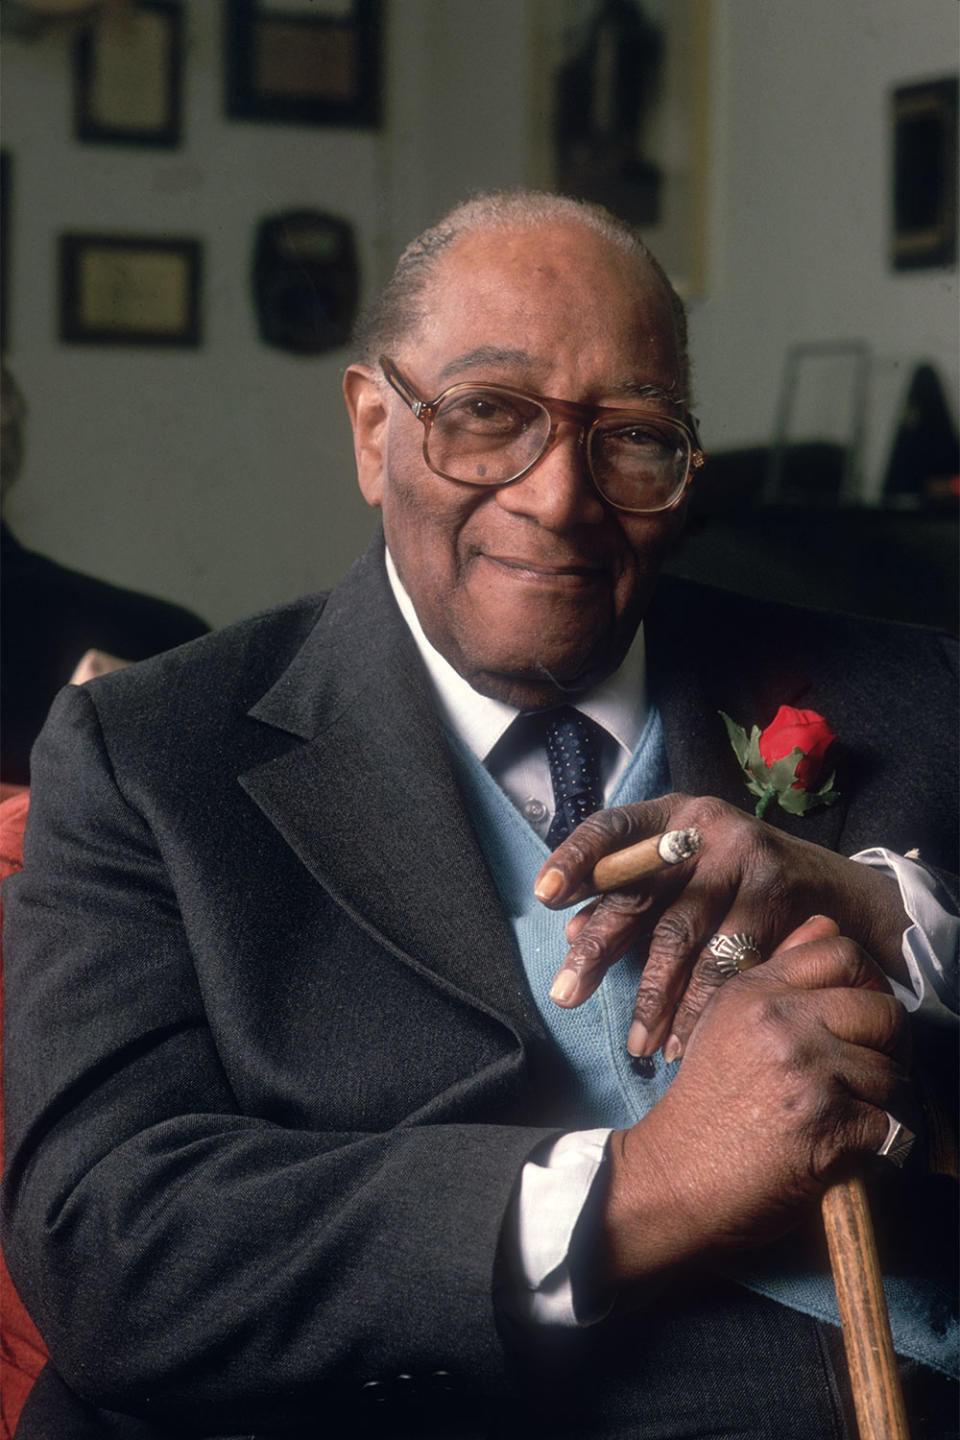 <p>James Van Der Zee, pictured, is honored for documenting the Harlem Renaissance during the 1920s and '30s, capturing the vibrance of the neighborhood and celebrities, such as Bill “Bojangles” Robinson and Mamie Smith.</p>